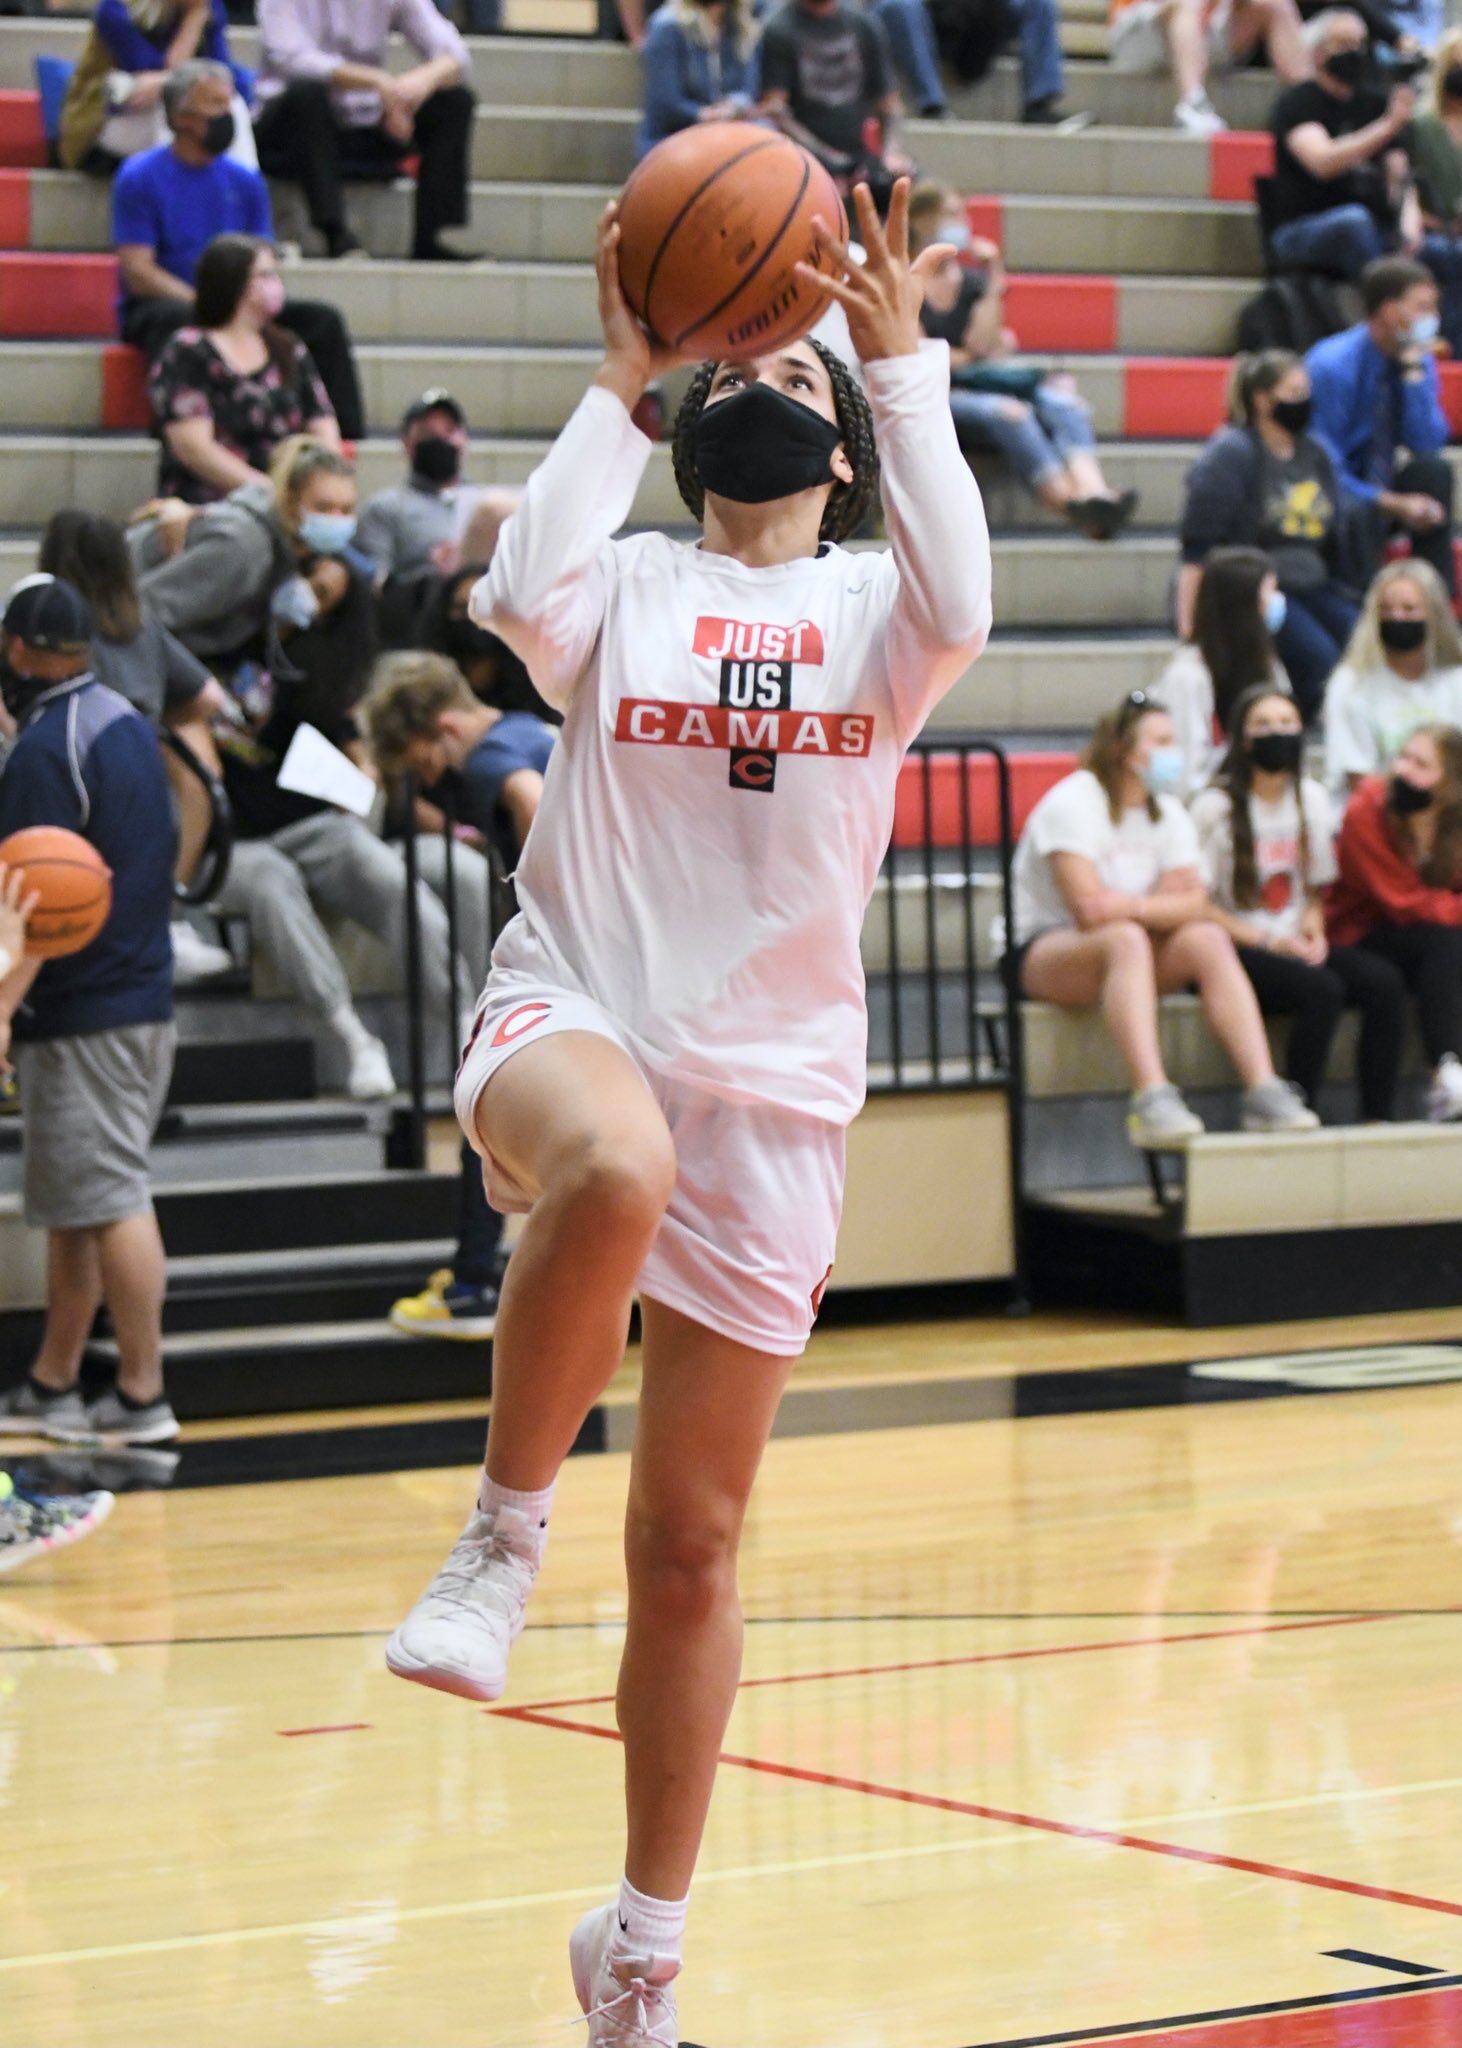 Jalena Carlisle is one of three seniors on the Camas basketball team that have welcomed a young wave of talent. Coach Scott Thompson said Carlisle, Faith Bergstrom, and Katelynn Forner have great basketball talent but their leadership skills are even better. Photo courtesy Kris Cavin